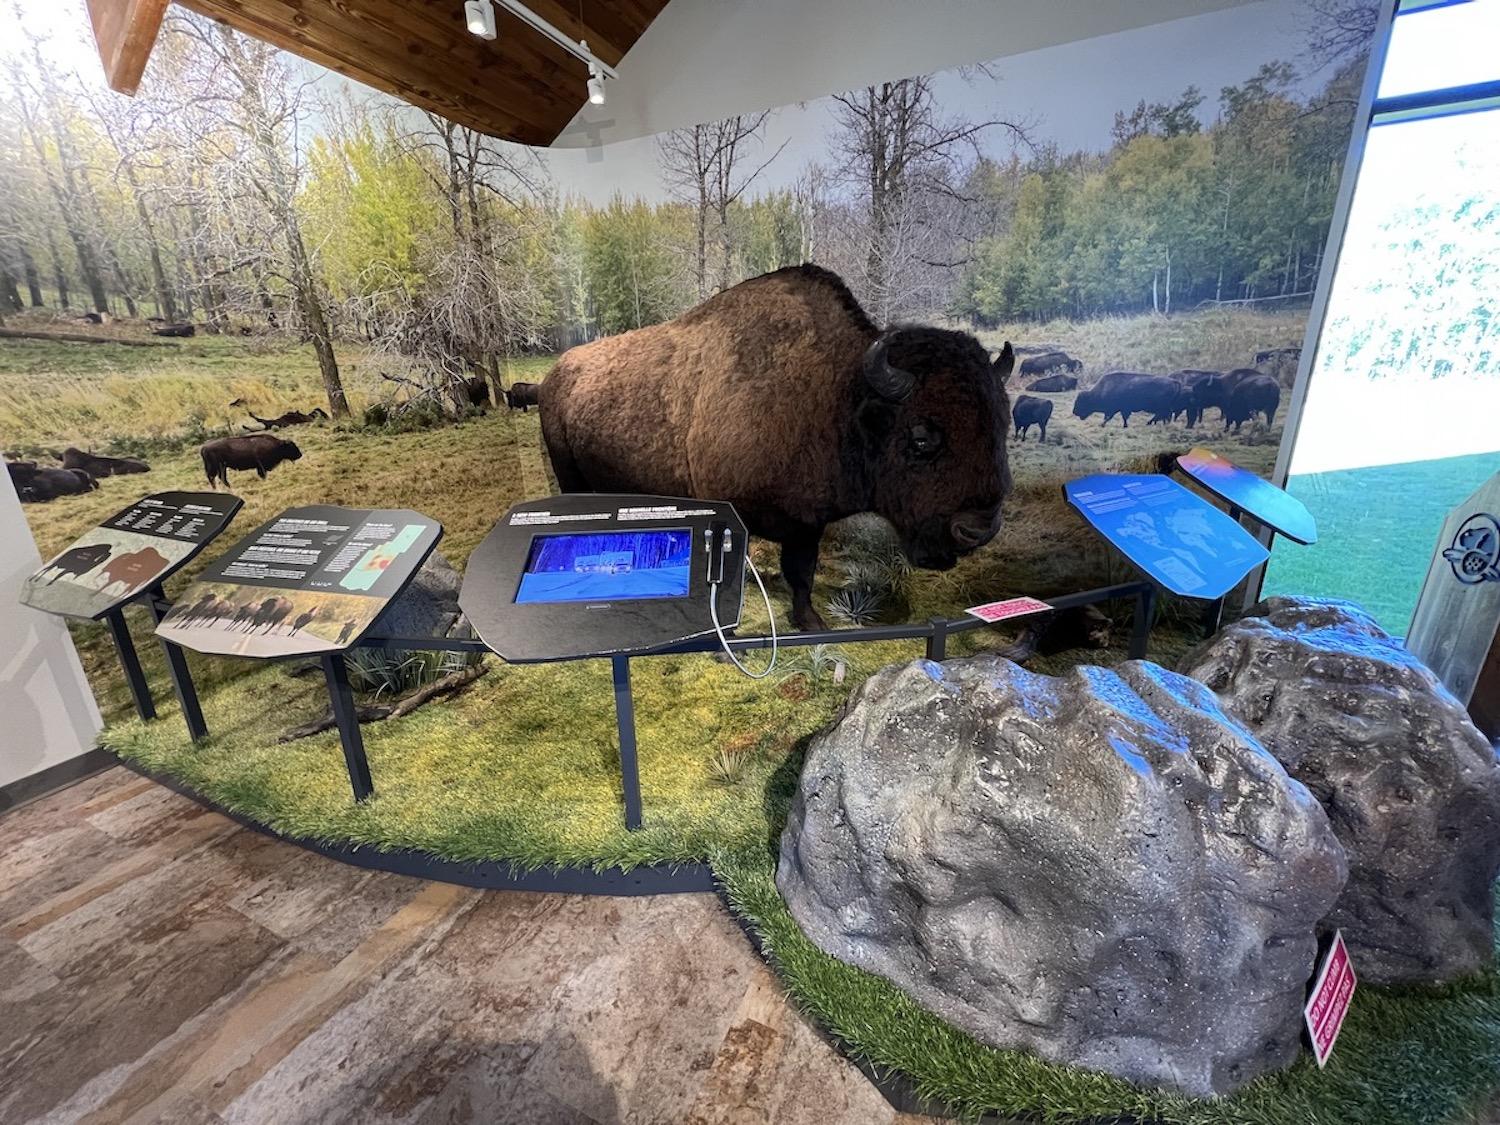 You can learn about bison inside the park's Wahkotowin Visitor Information Centre.